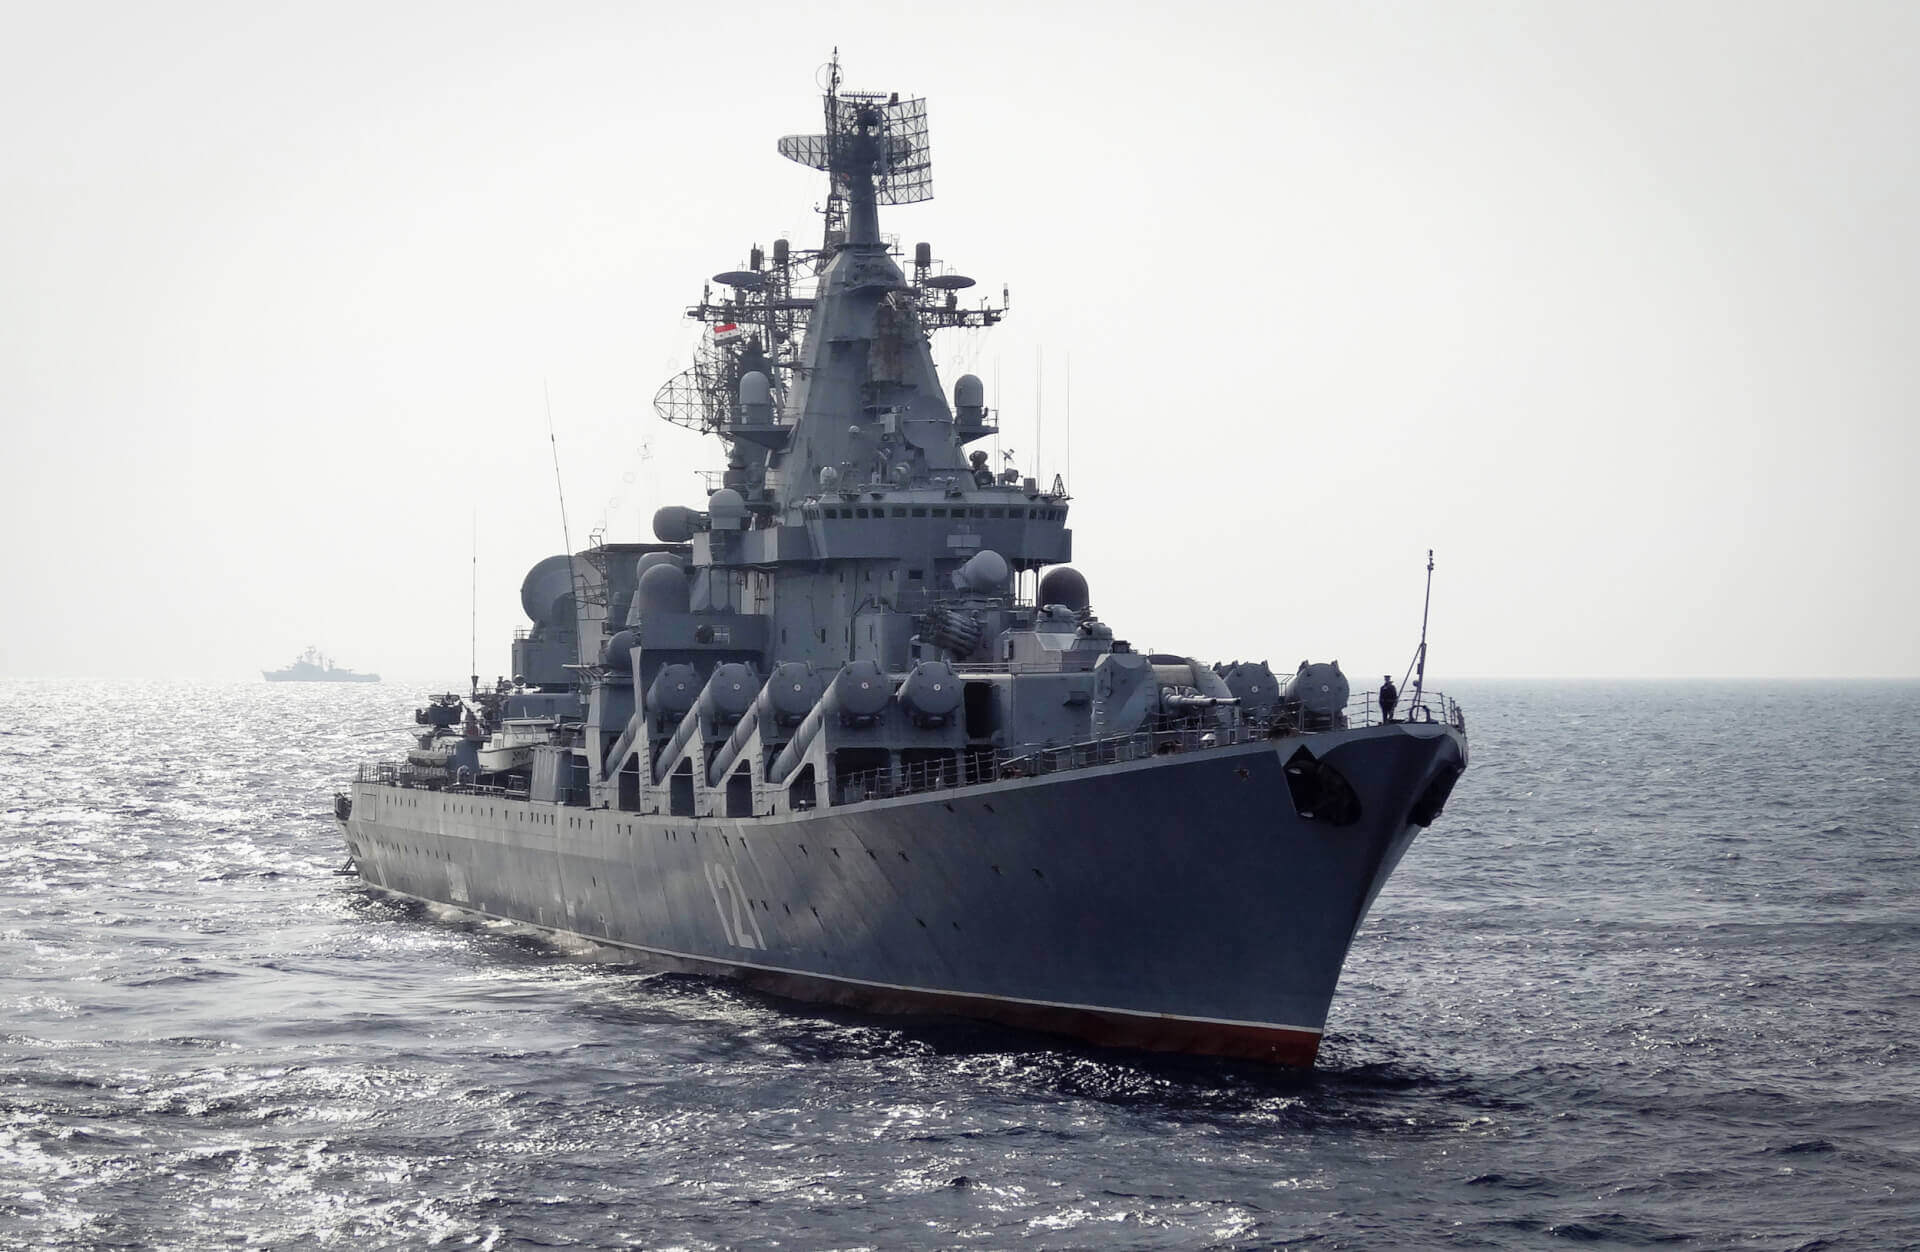 Japan Lodges Protest After Russian, Chinese Warships Enter Disputed Waters